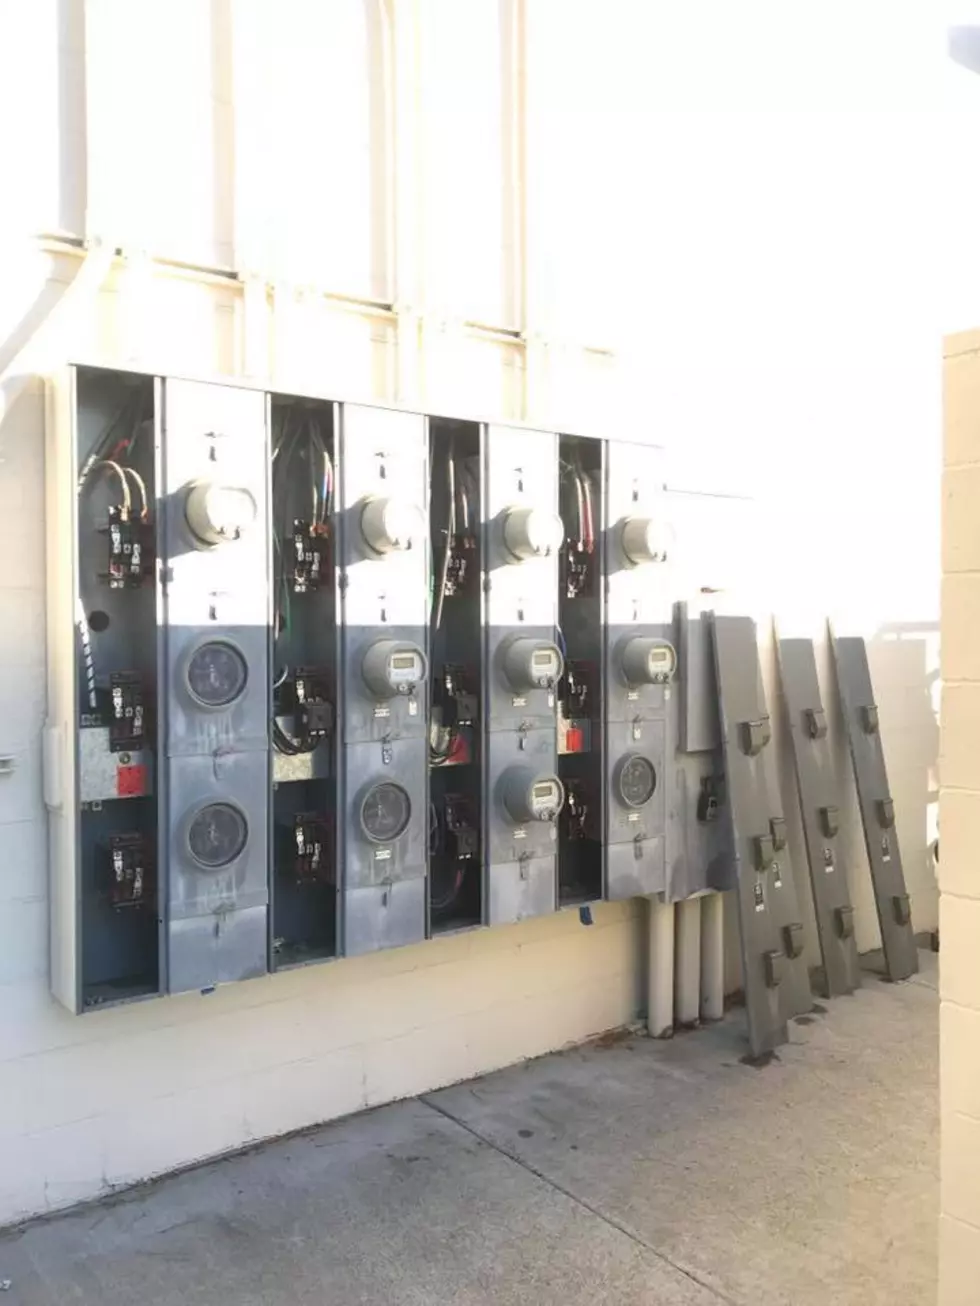 Who Steals Major Electrical Boxes and Breakers? These Guys Did